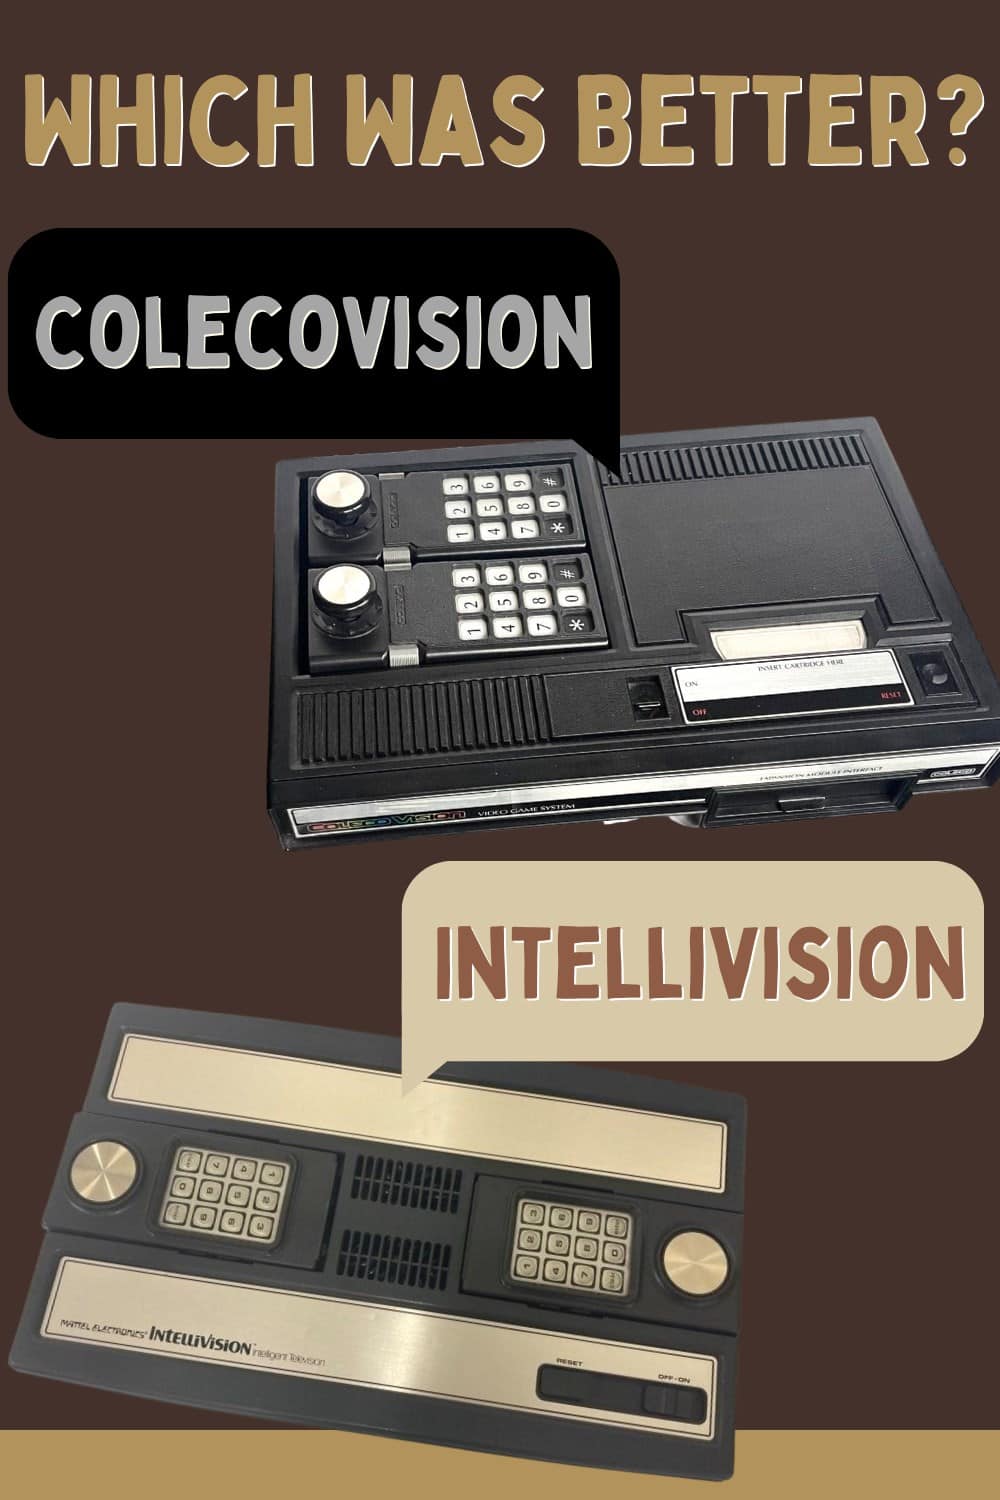 ColecoVision vs Intellivision which is better?